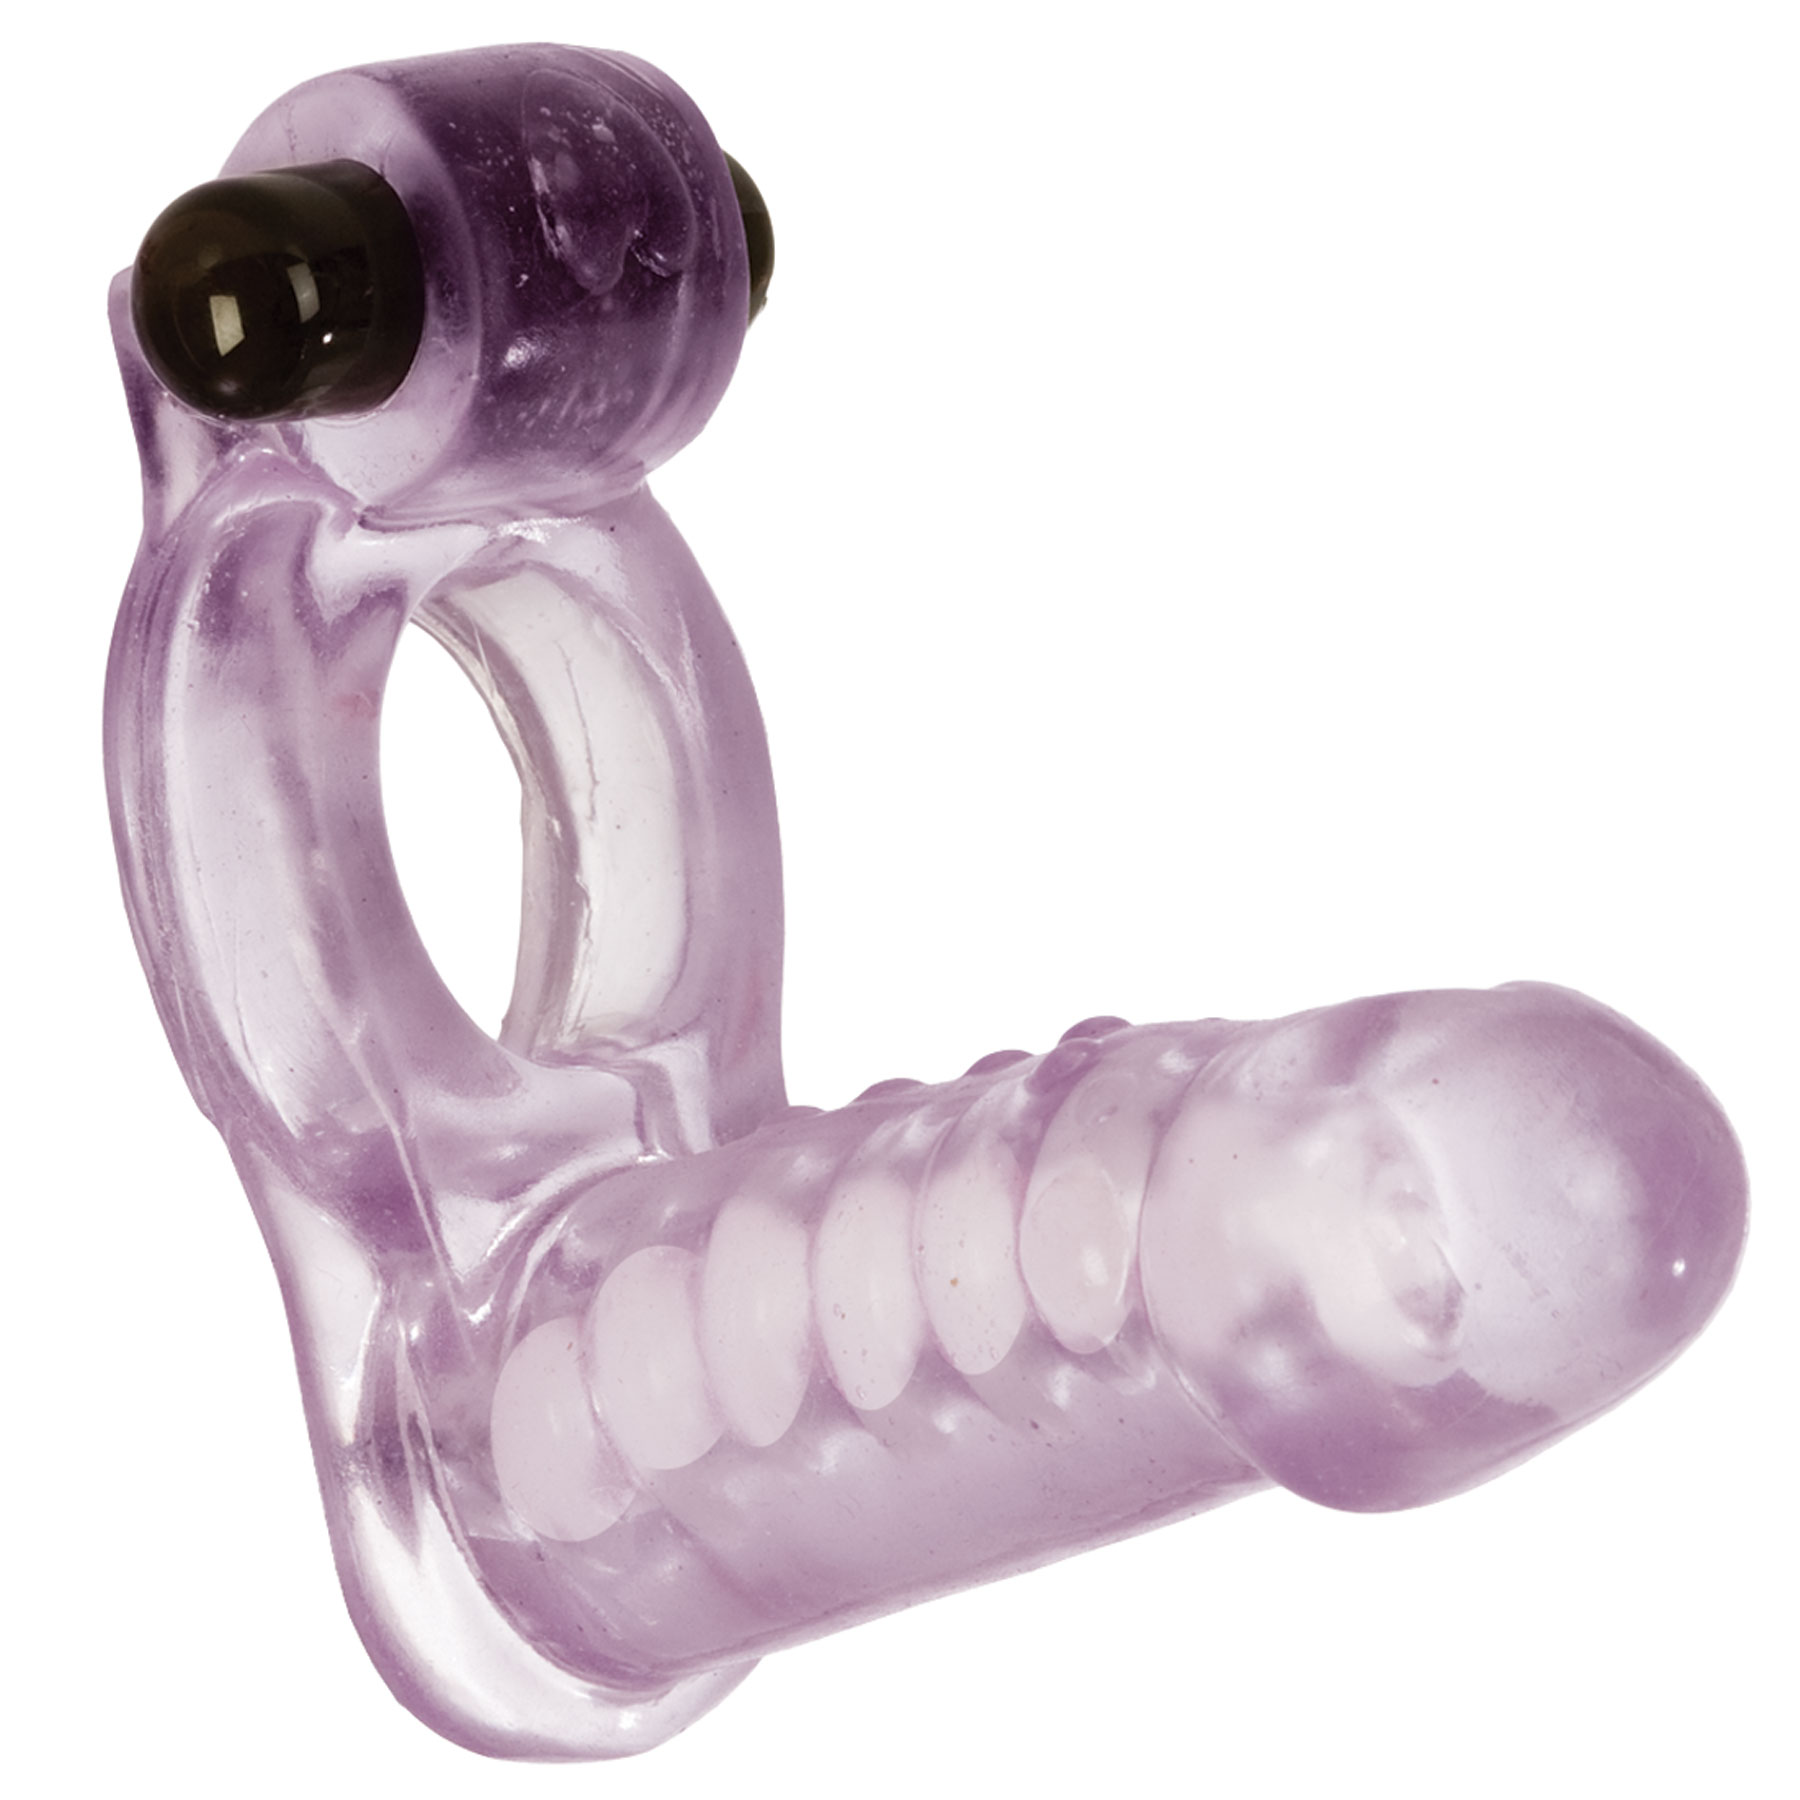 Extreme Anal Toy Penetration